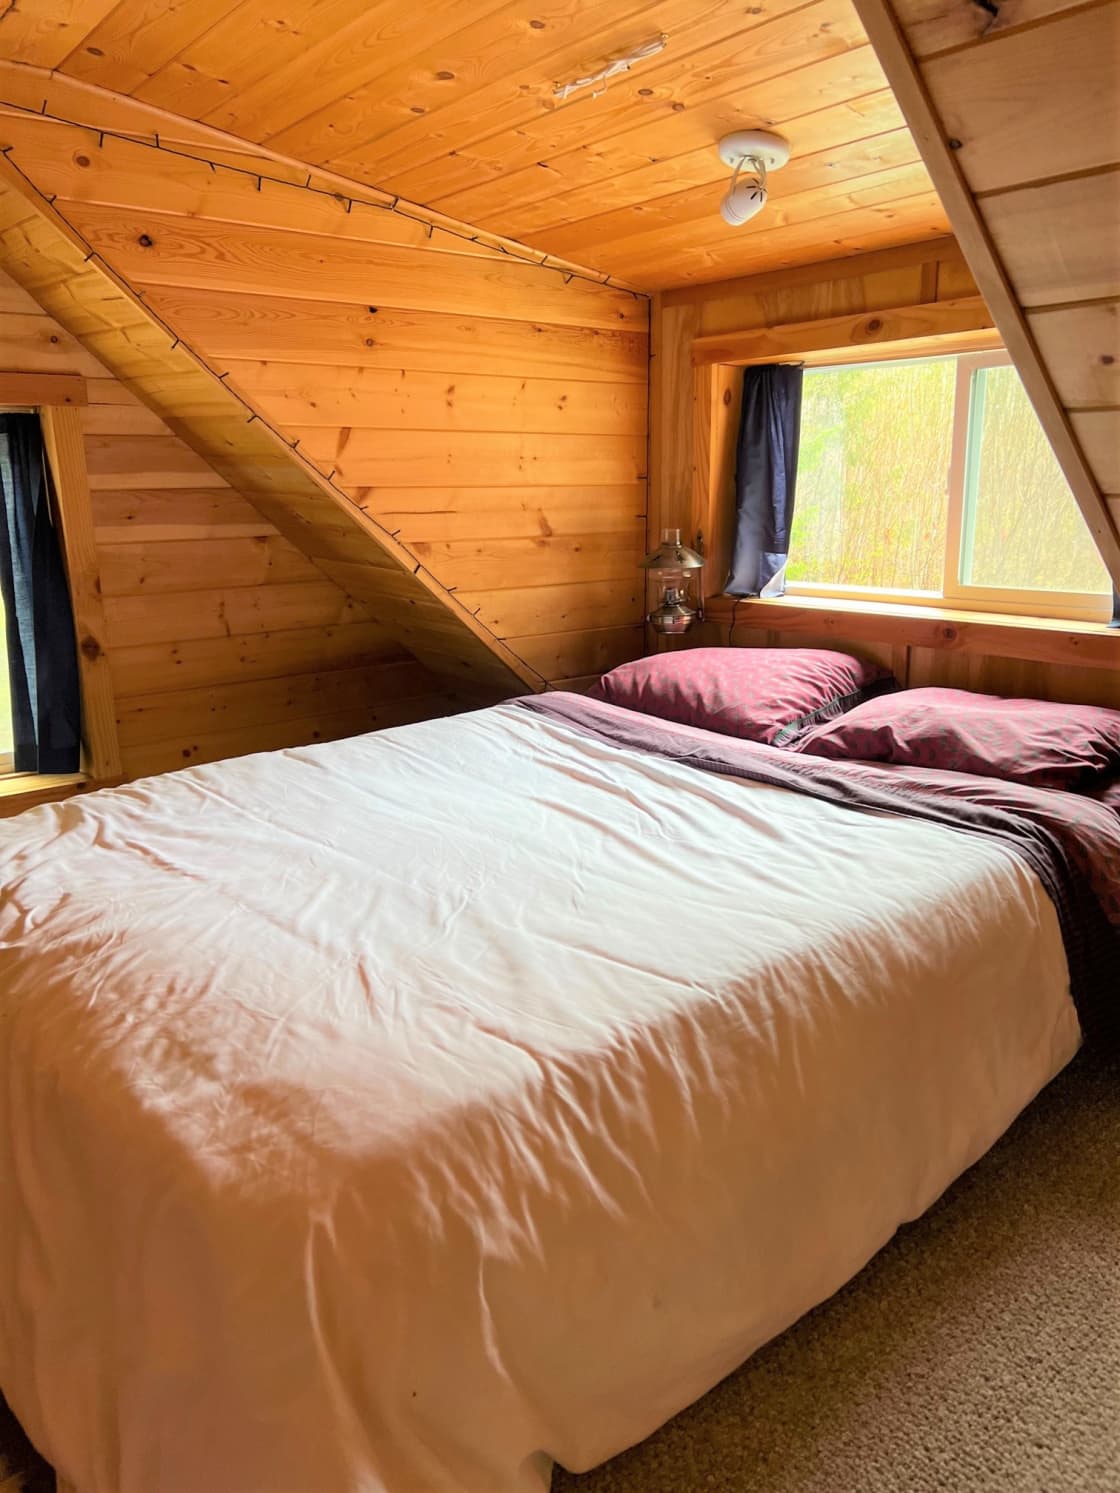 Sleeping loft with full-sized (double) futon bed
